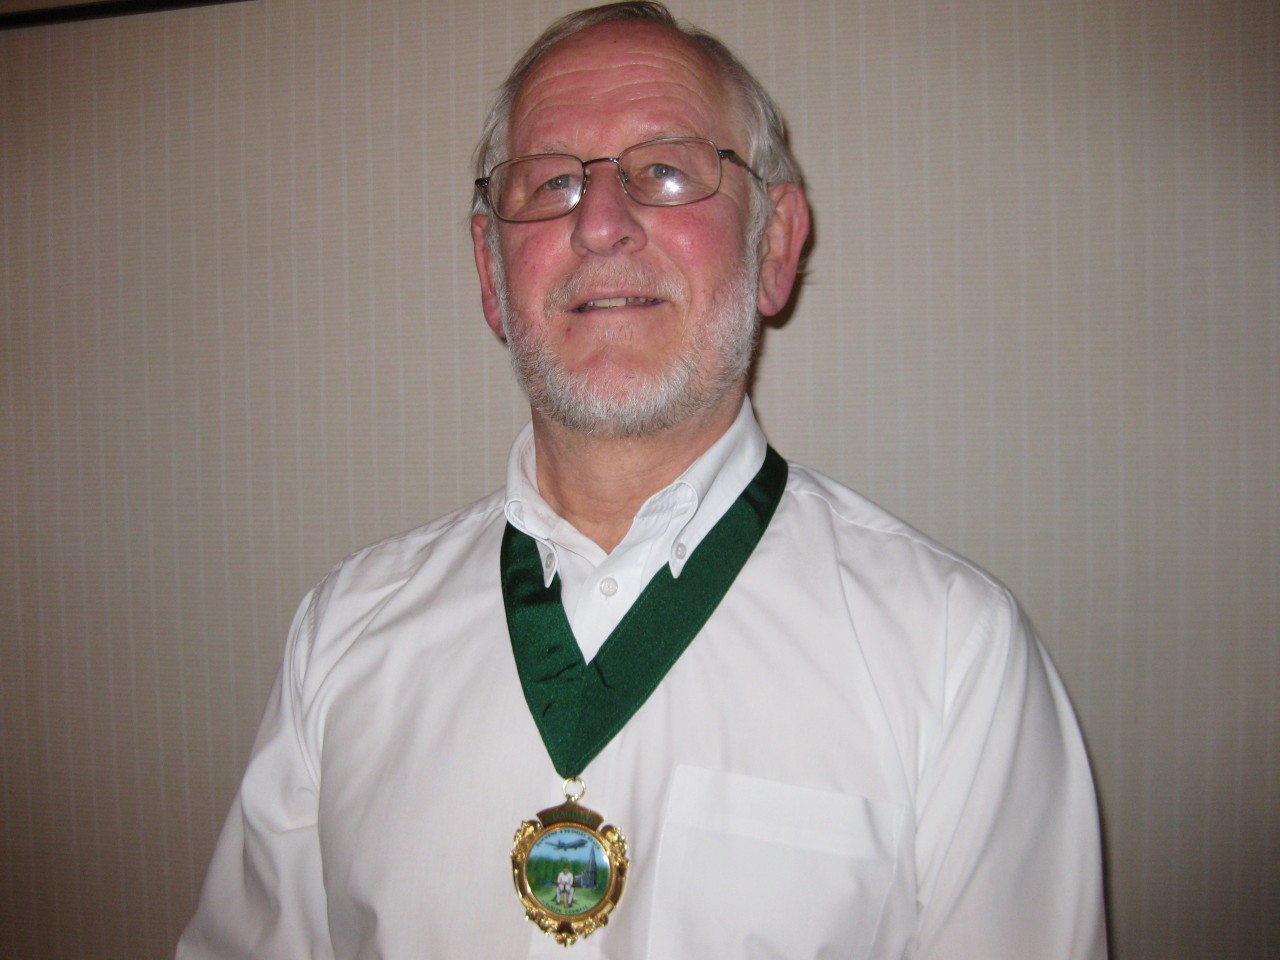 A picture of Graeme Riley wearing the chain of office as chair of the parish council